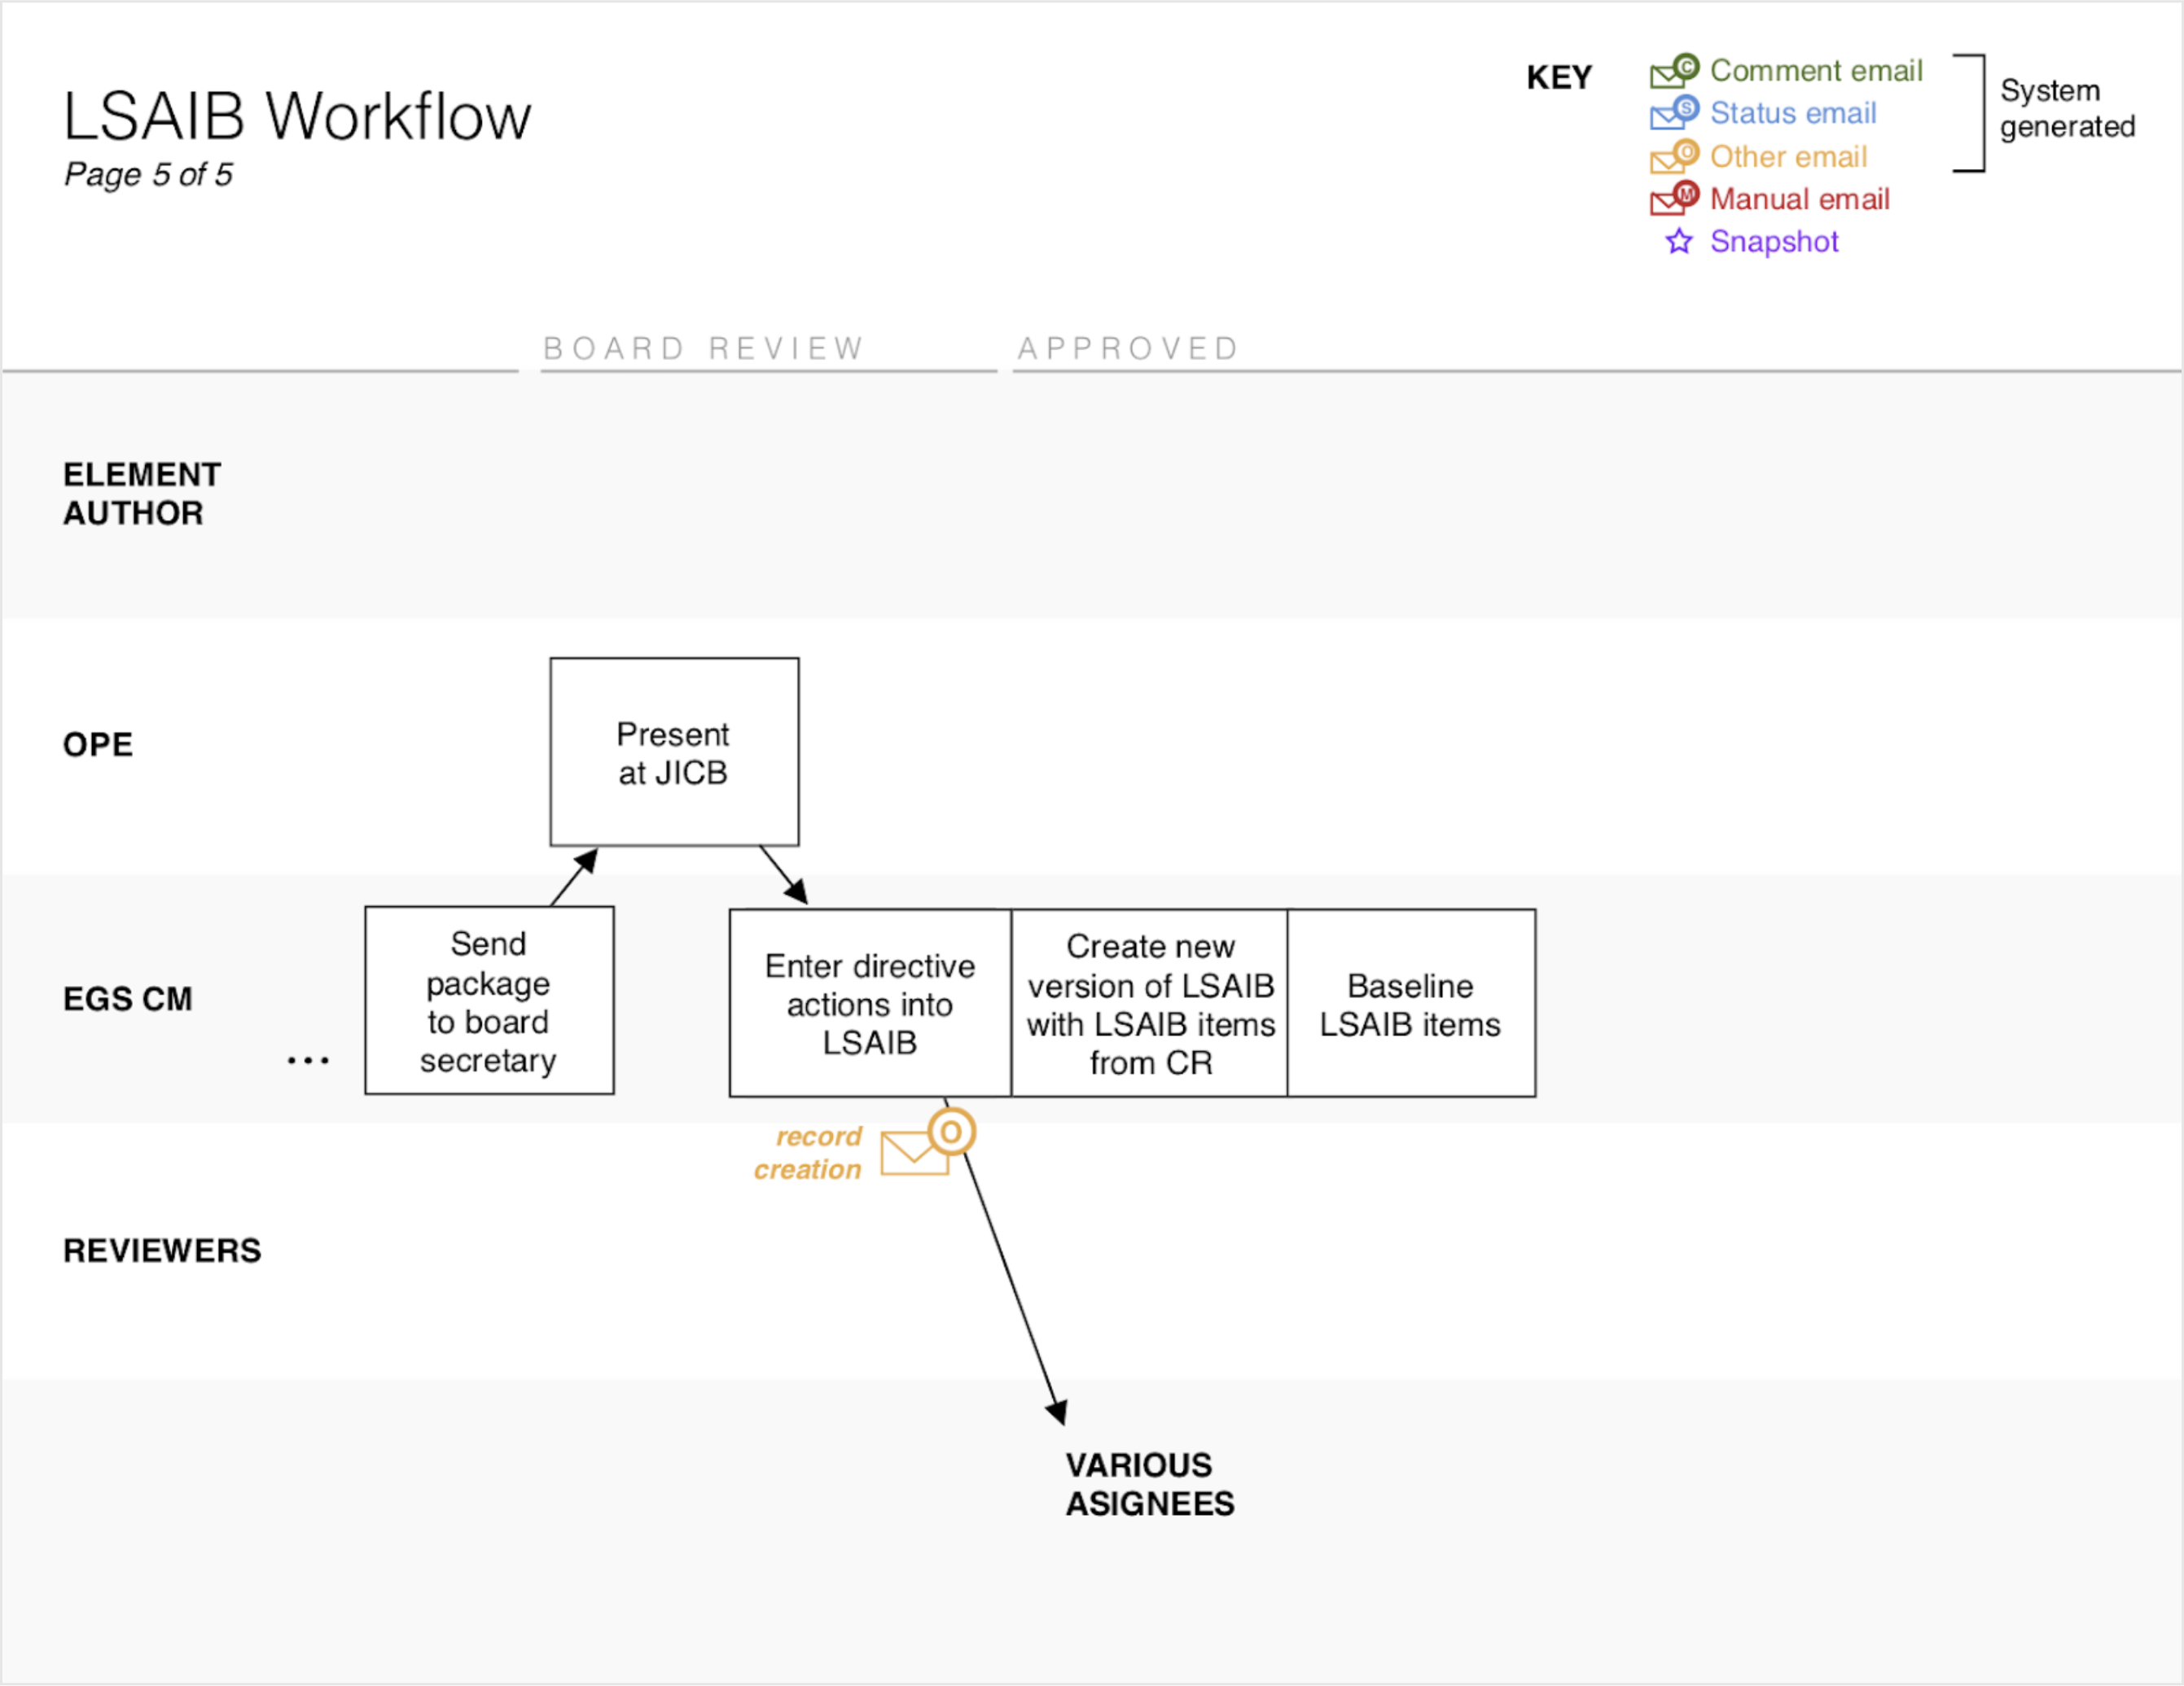 The new LSAIB workflow, (Page 5 of 5)